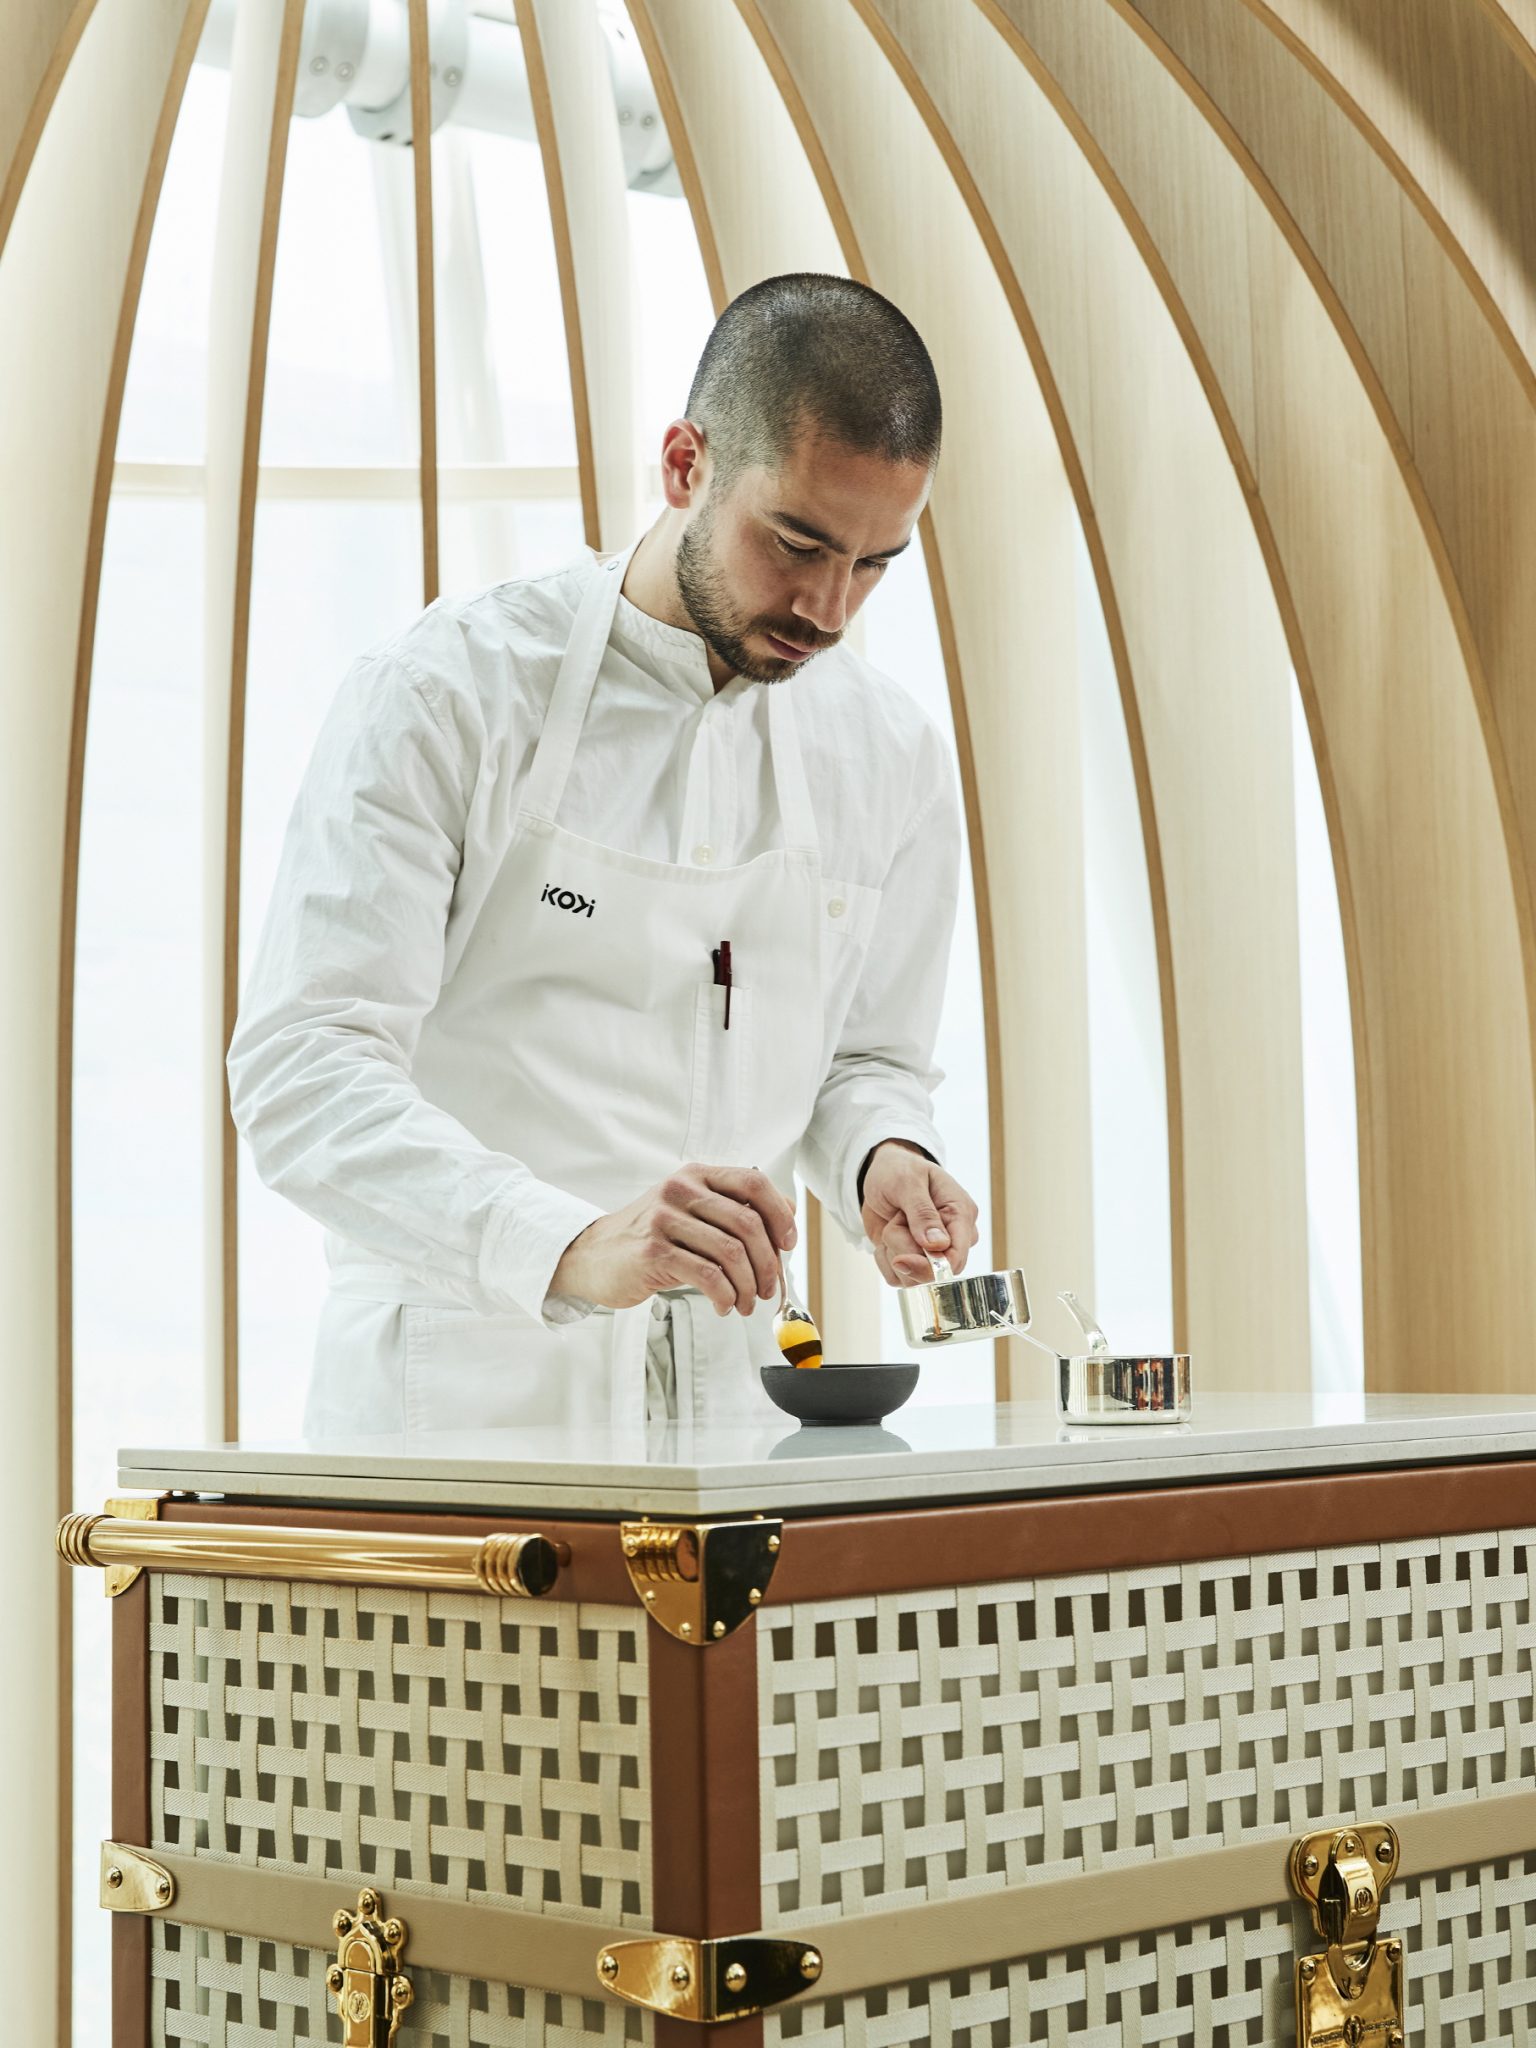 Chef from Michelin-starred Ikoyi comes to Louis Vuitton Maison Seoul